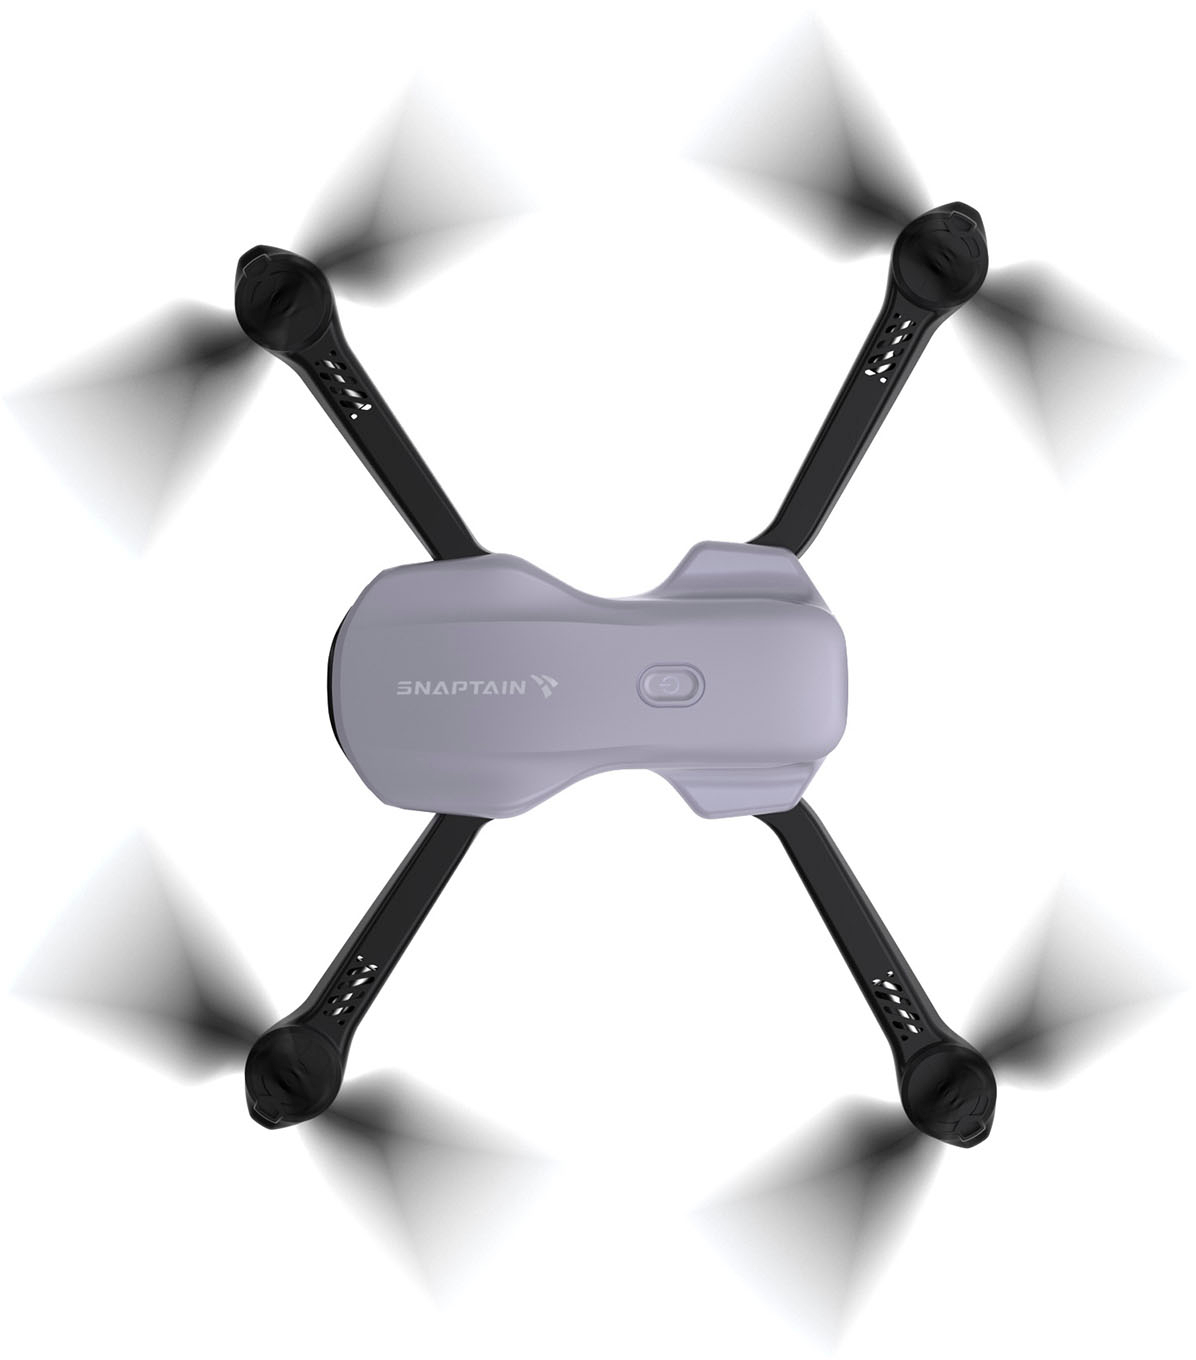 Left View: Snaptain - E10 1080P Drone with Remote Controller - Gray